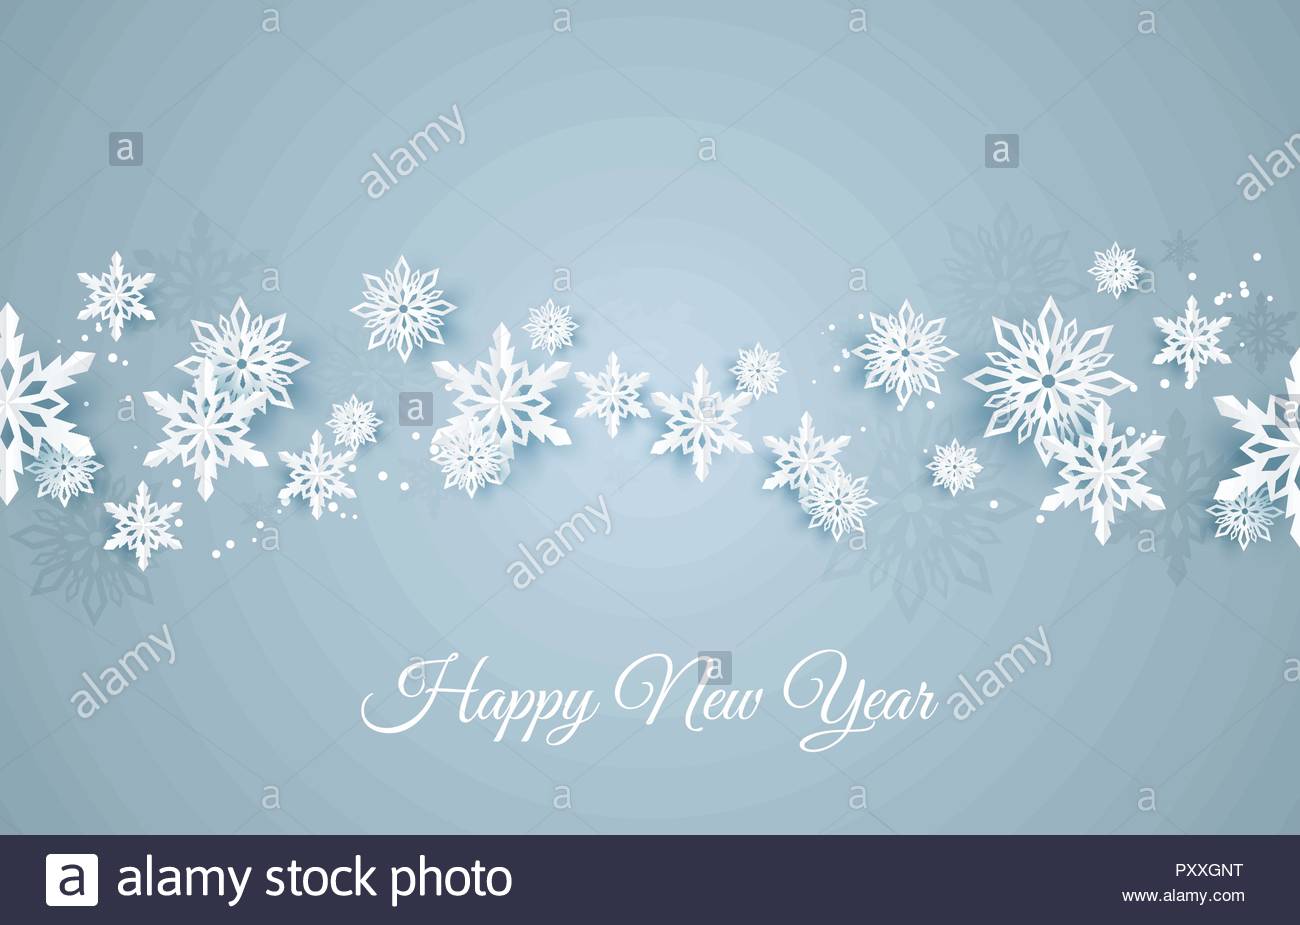 Christmas Card With Paper Snow Flake Falling Snowflakes On A Dark